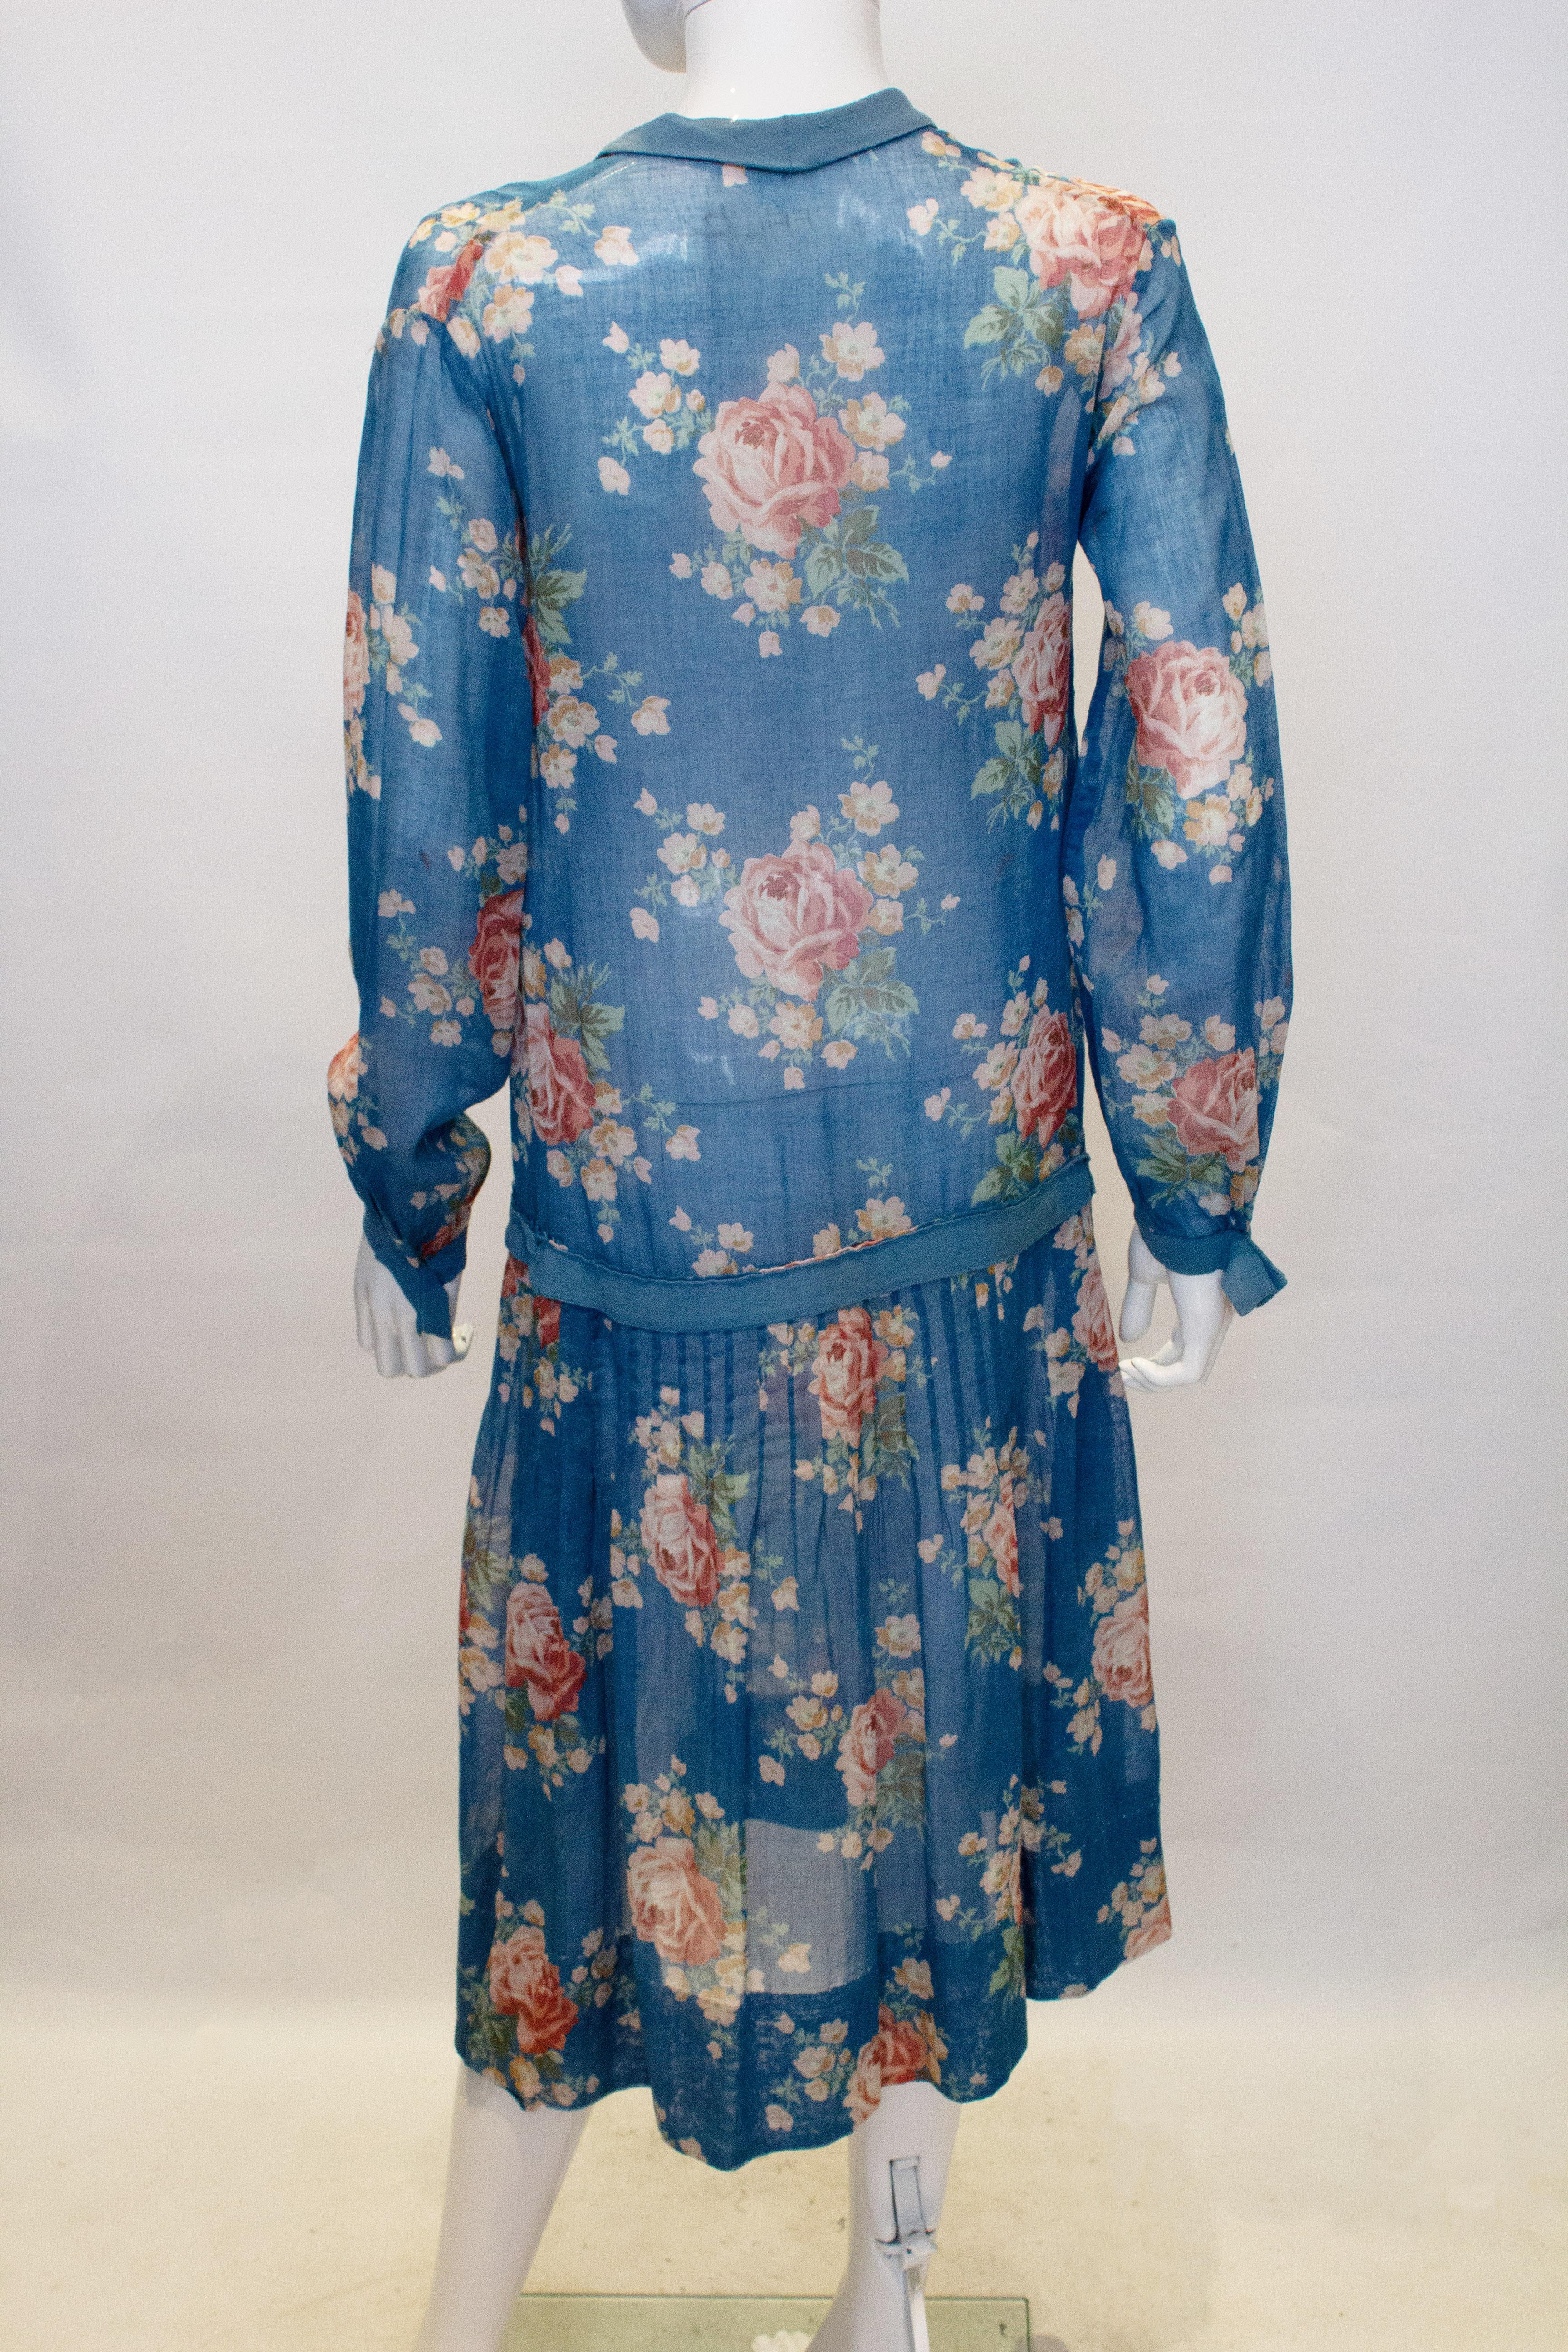 Vintage 1920s Blue Floral Cotton Dress In Good Condition For Sale In London, GB